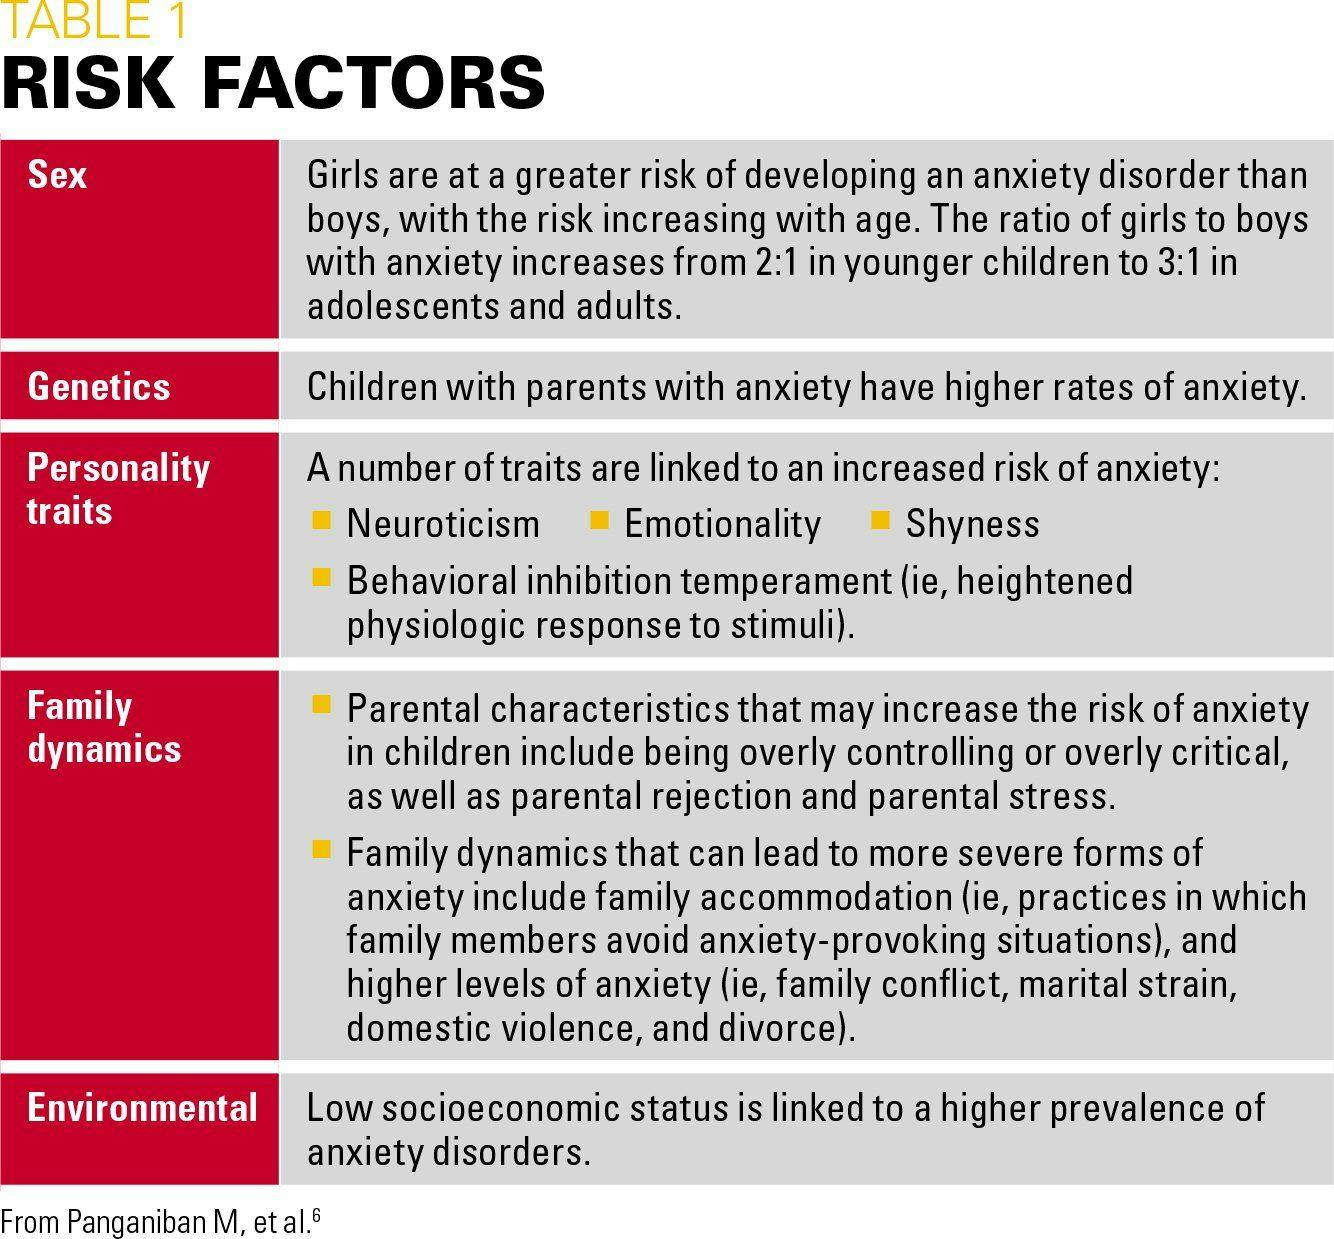 Risk factors for anxiety